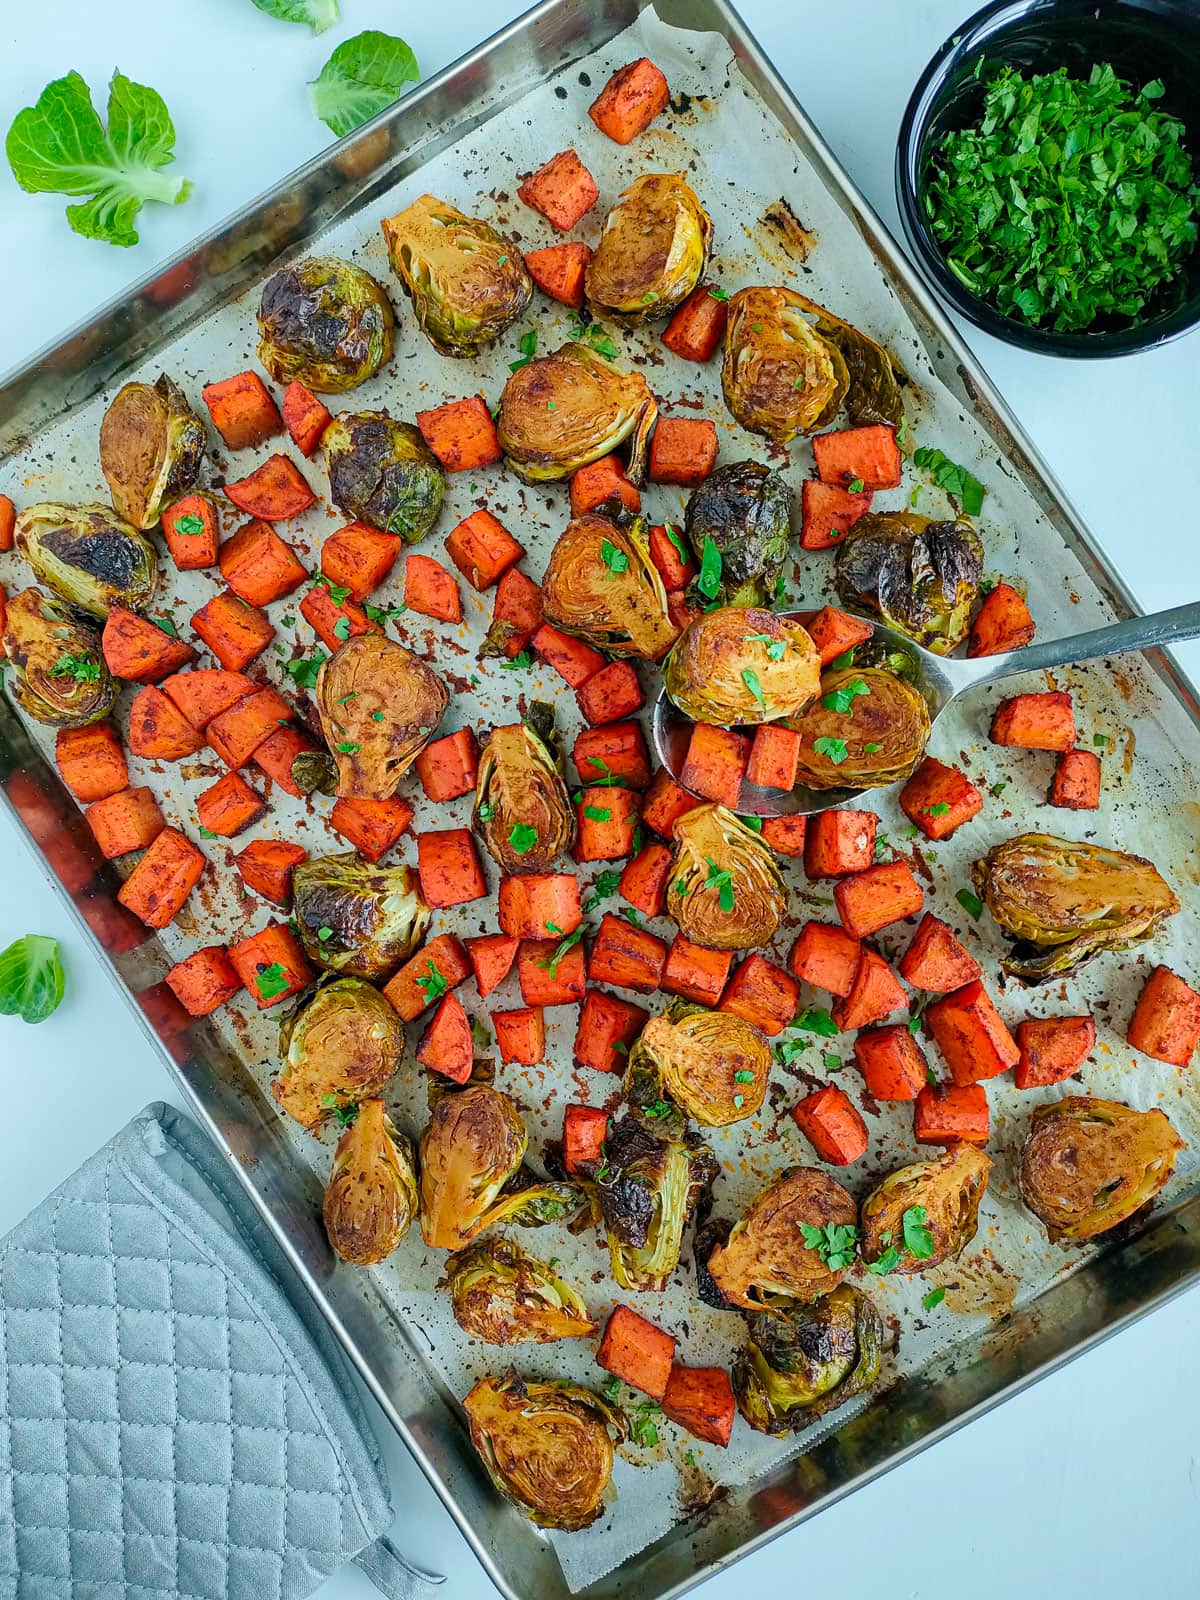 Balsamic roasted carrots and brussels sprouts on a sheet pan.